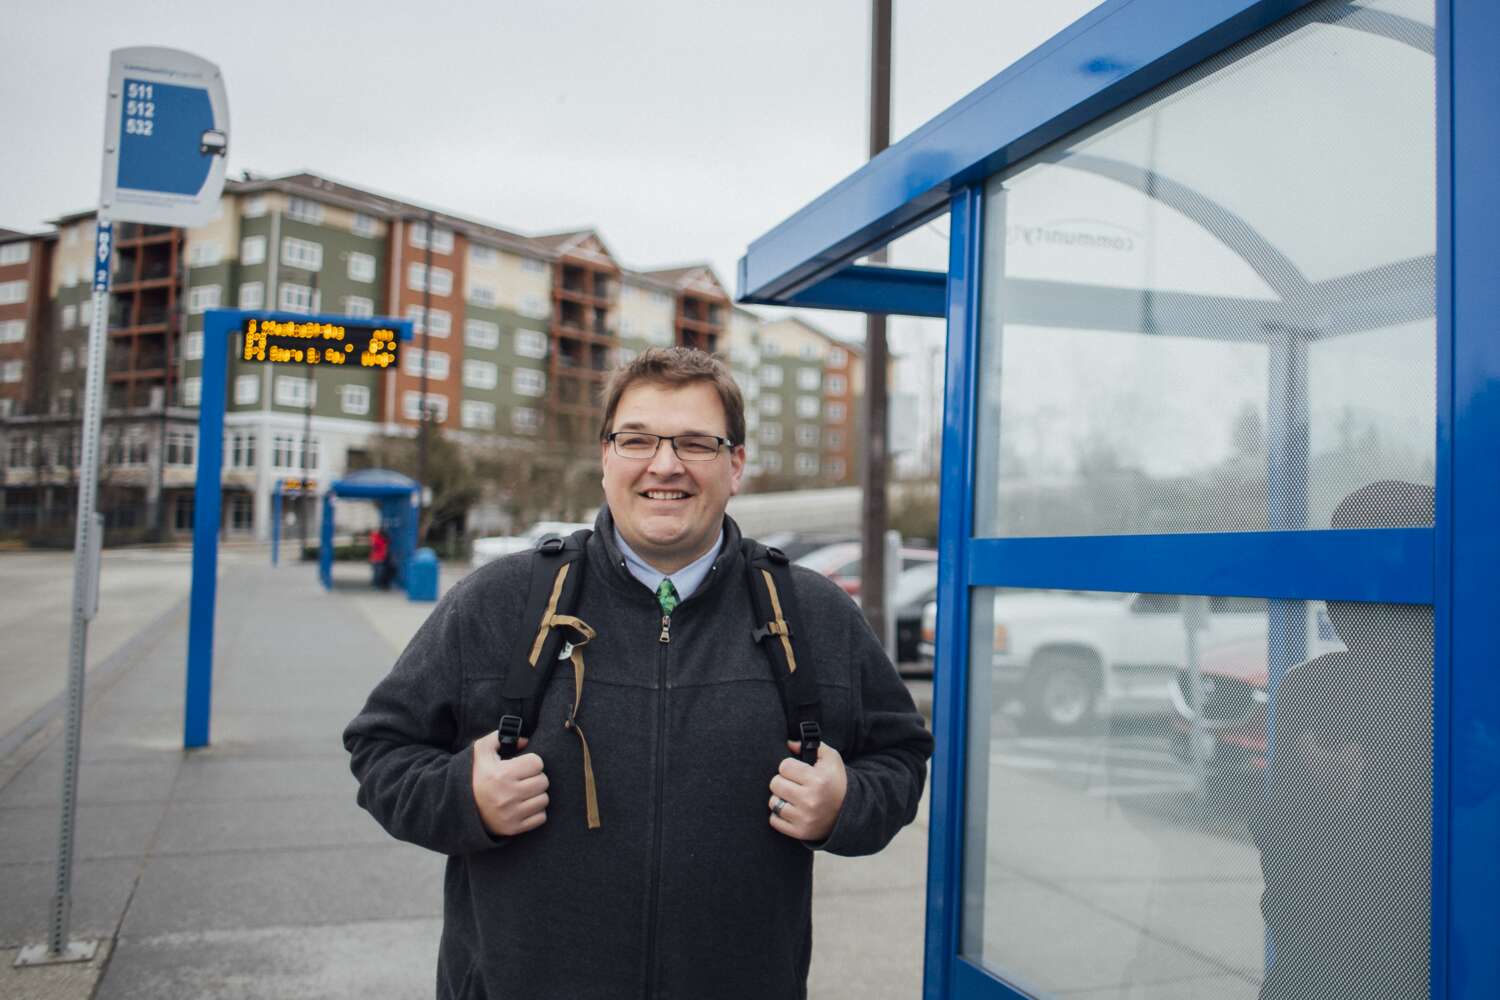 Smiling man waiting at a bus stop in front of a multi-family complex.